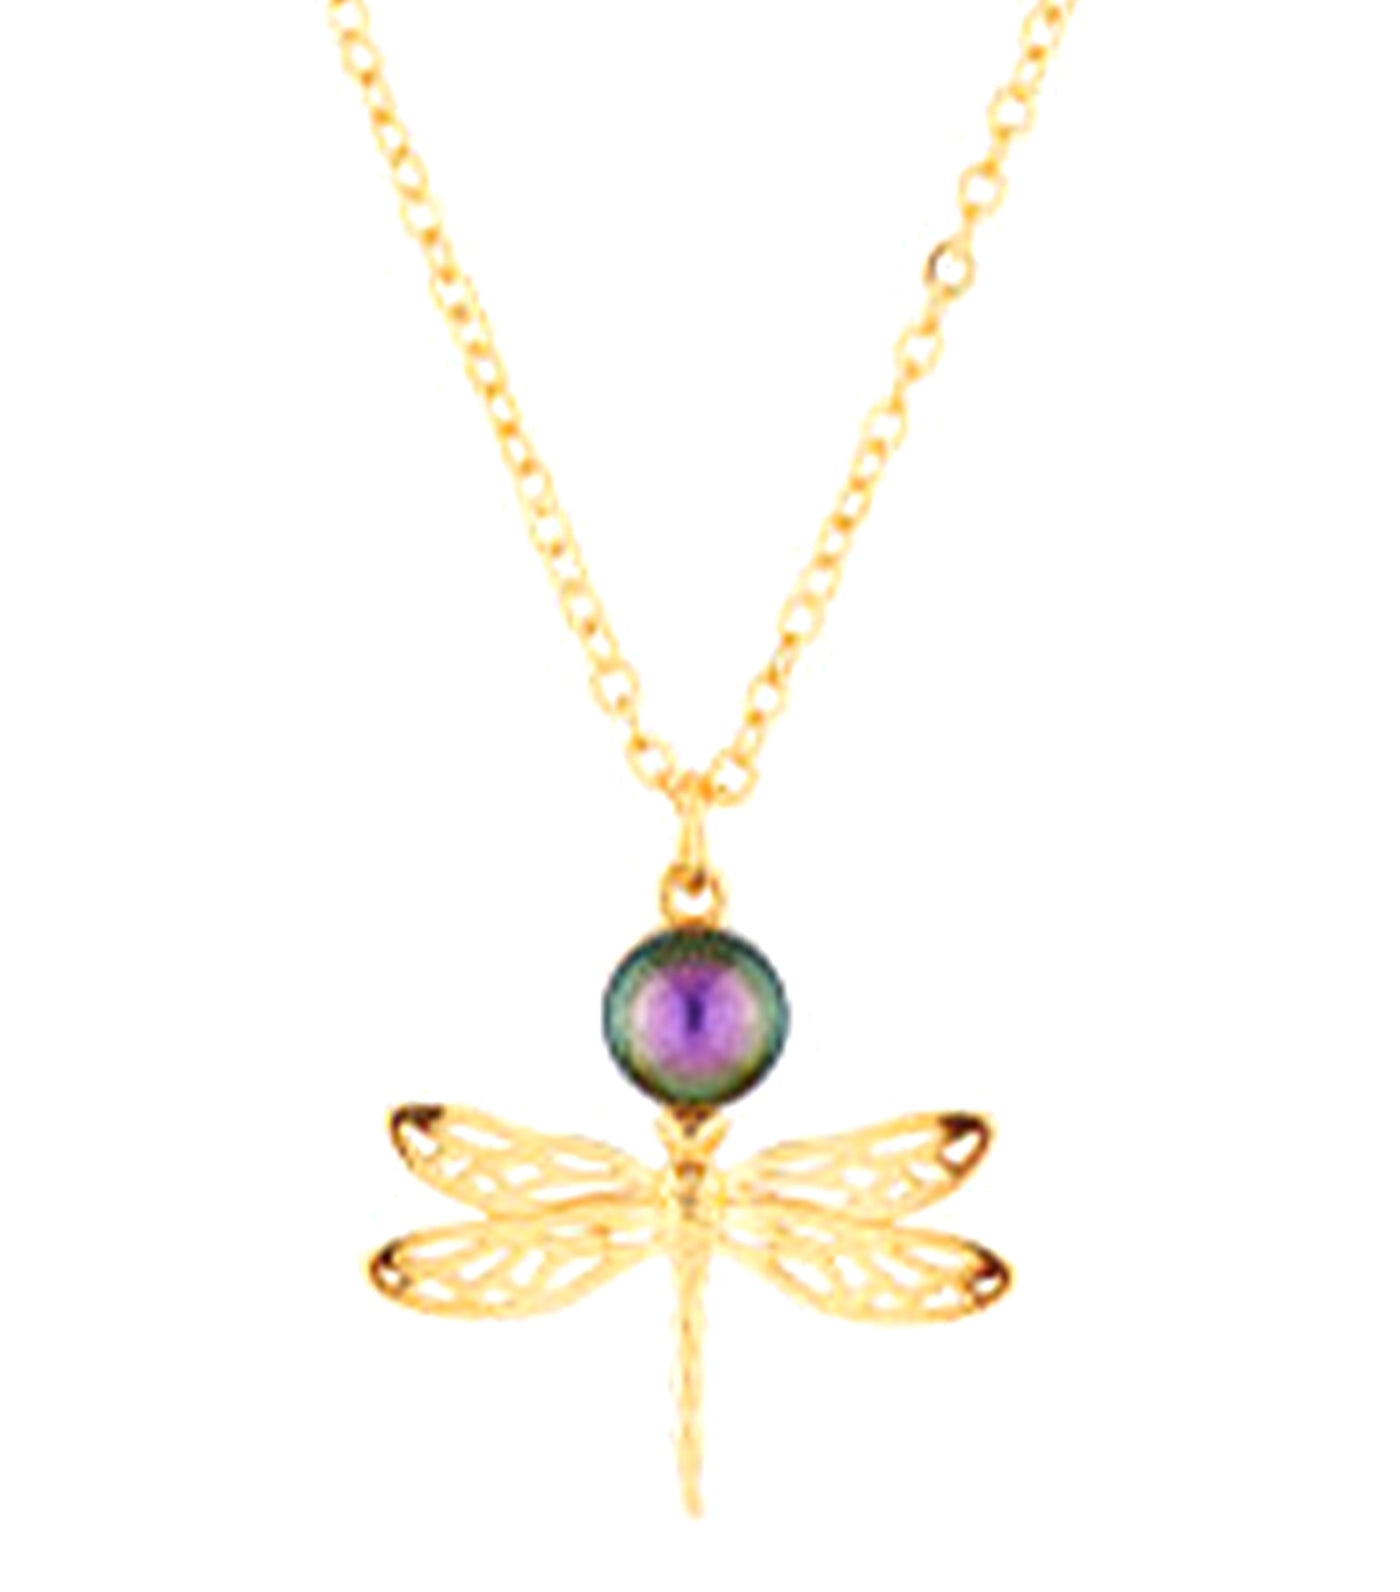 Dragonfly-Iridescent Necklace